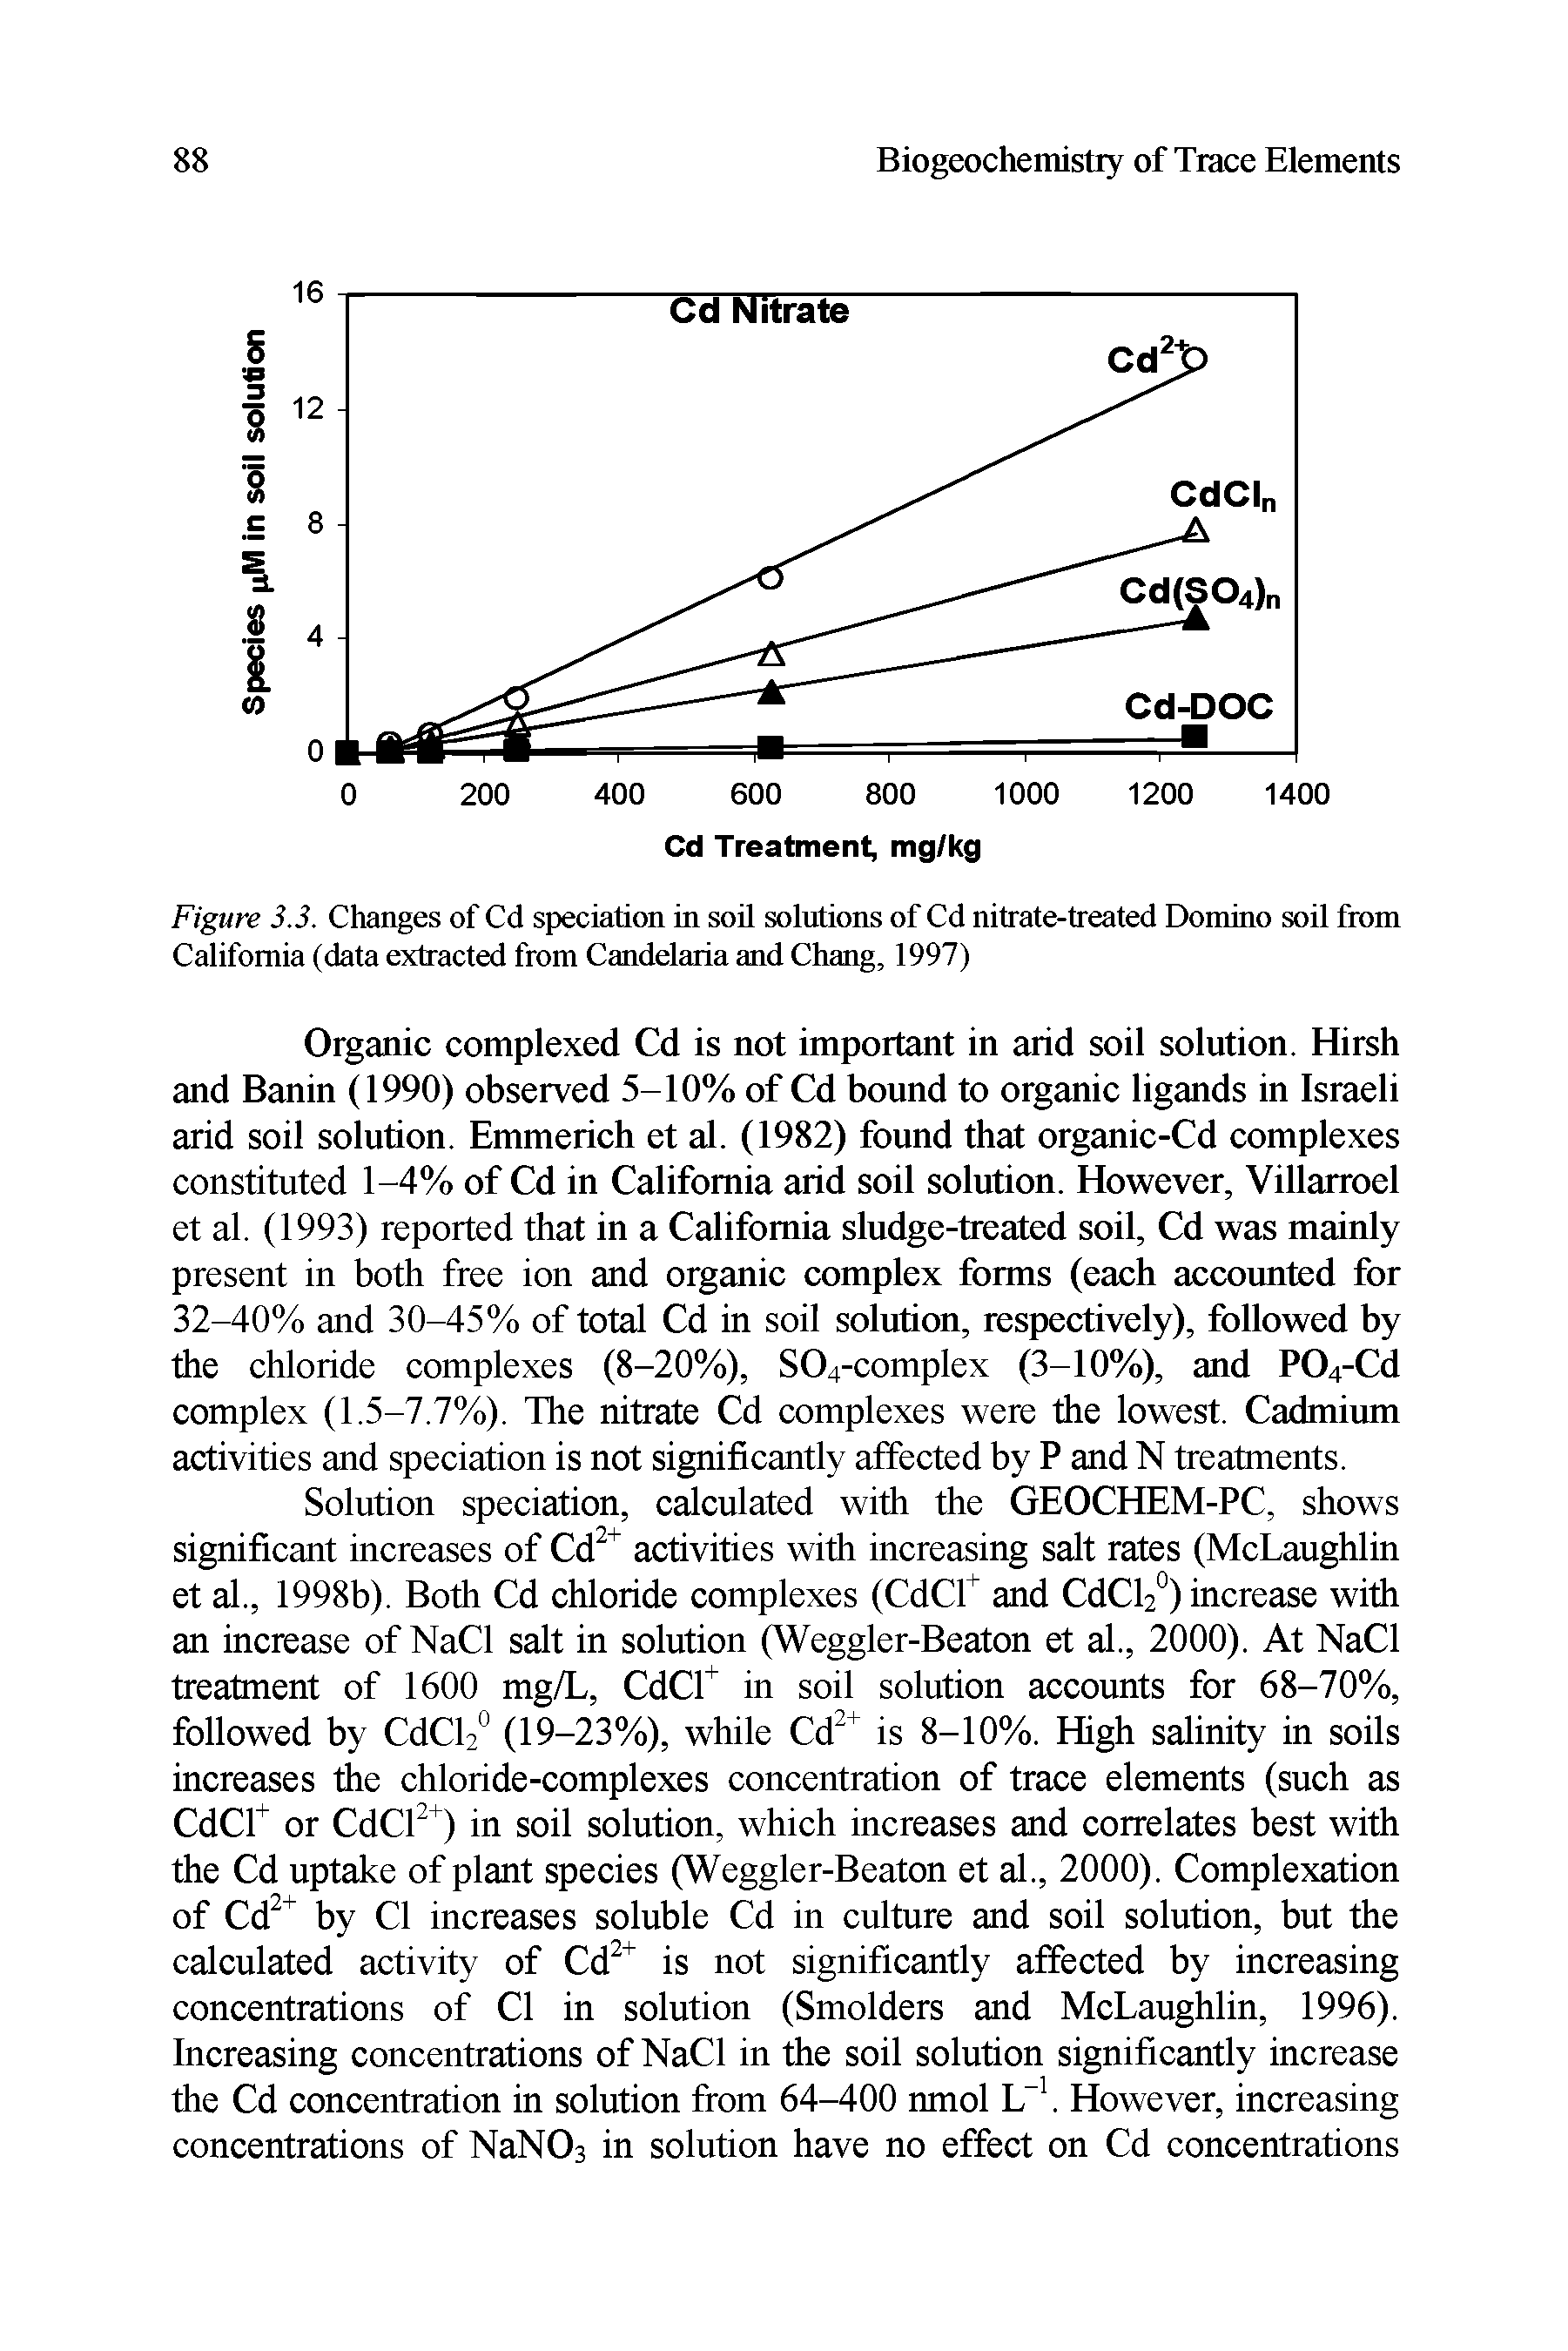 Figure 3.3. Changes of Cd speciation in soil solutions of Cd nitrate-treated Domino soil from California (data extracted from Candelaria and Chang, 1997)...